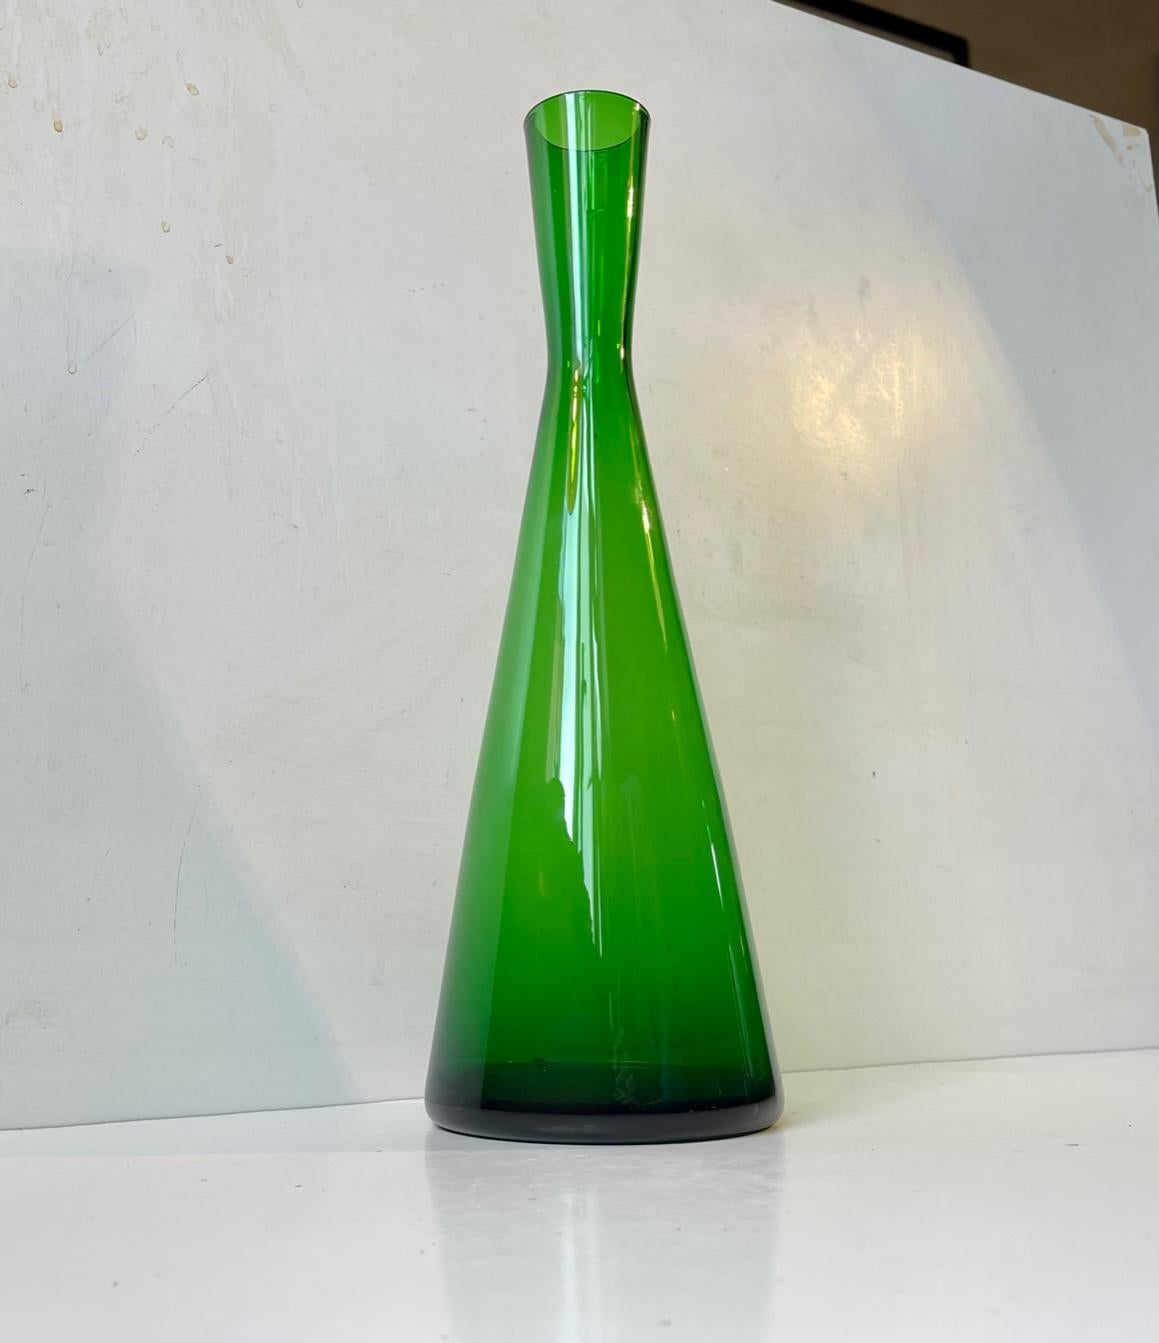 Green hand-blown Diablo shaped Glass Vase designed in 1956 by Per Lütken. Manufactured at Holmegaard in Denmark between 1956-65. Its very rare. Measurements: Height: 35 cm, Diameter: 11/4.5 cm. It can be used as a water bottle as well.